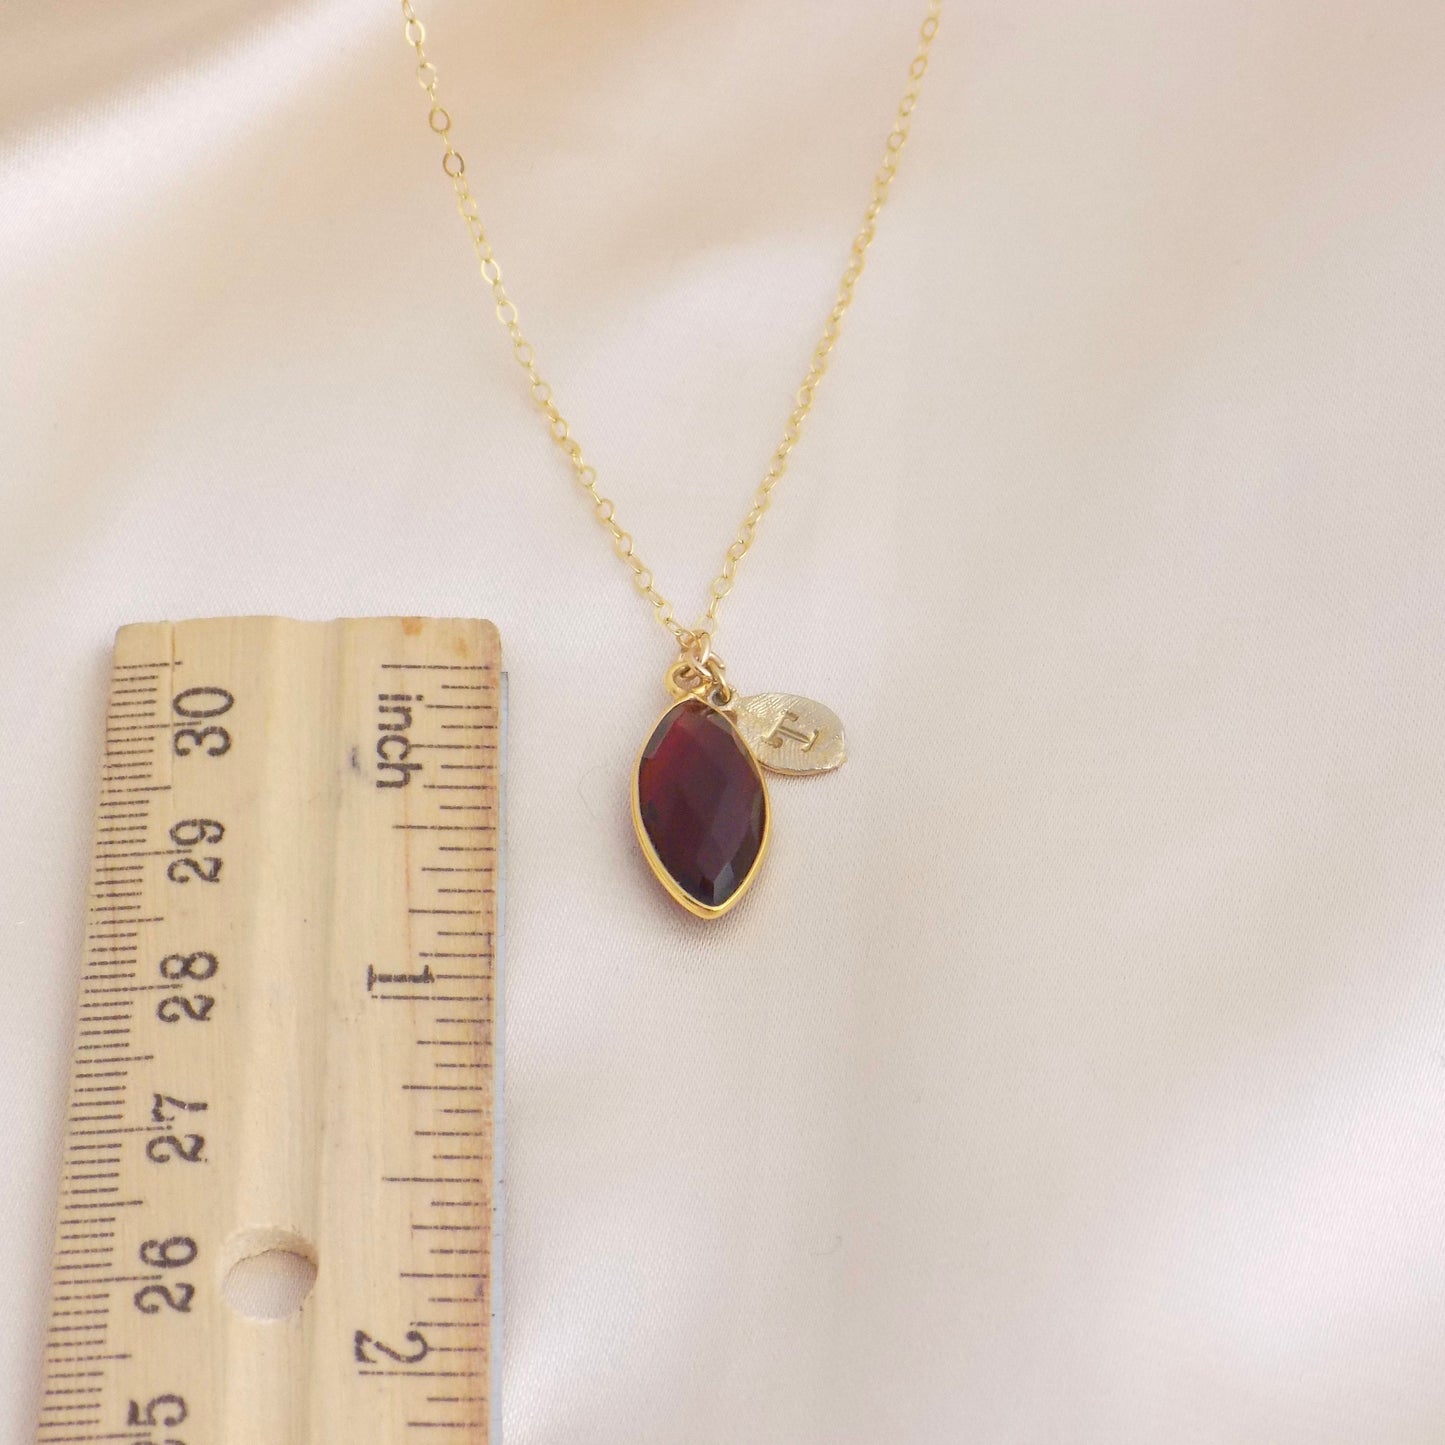 Garnet Necklace Gold Personalized, Dark Red Crystal Pendant, Mothers Day Gift, M6-98